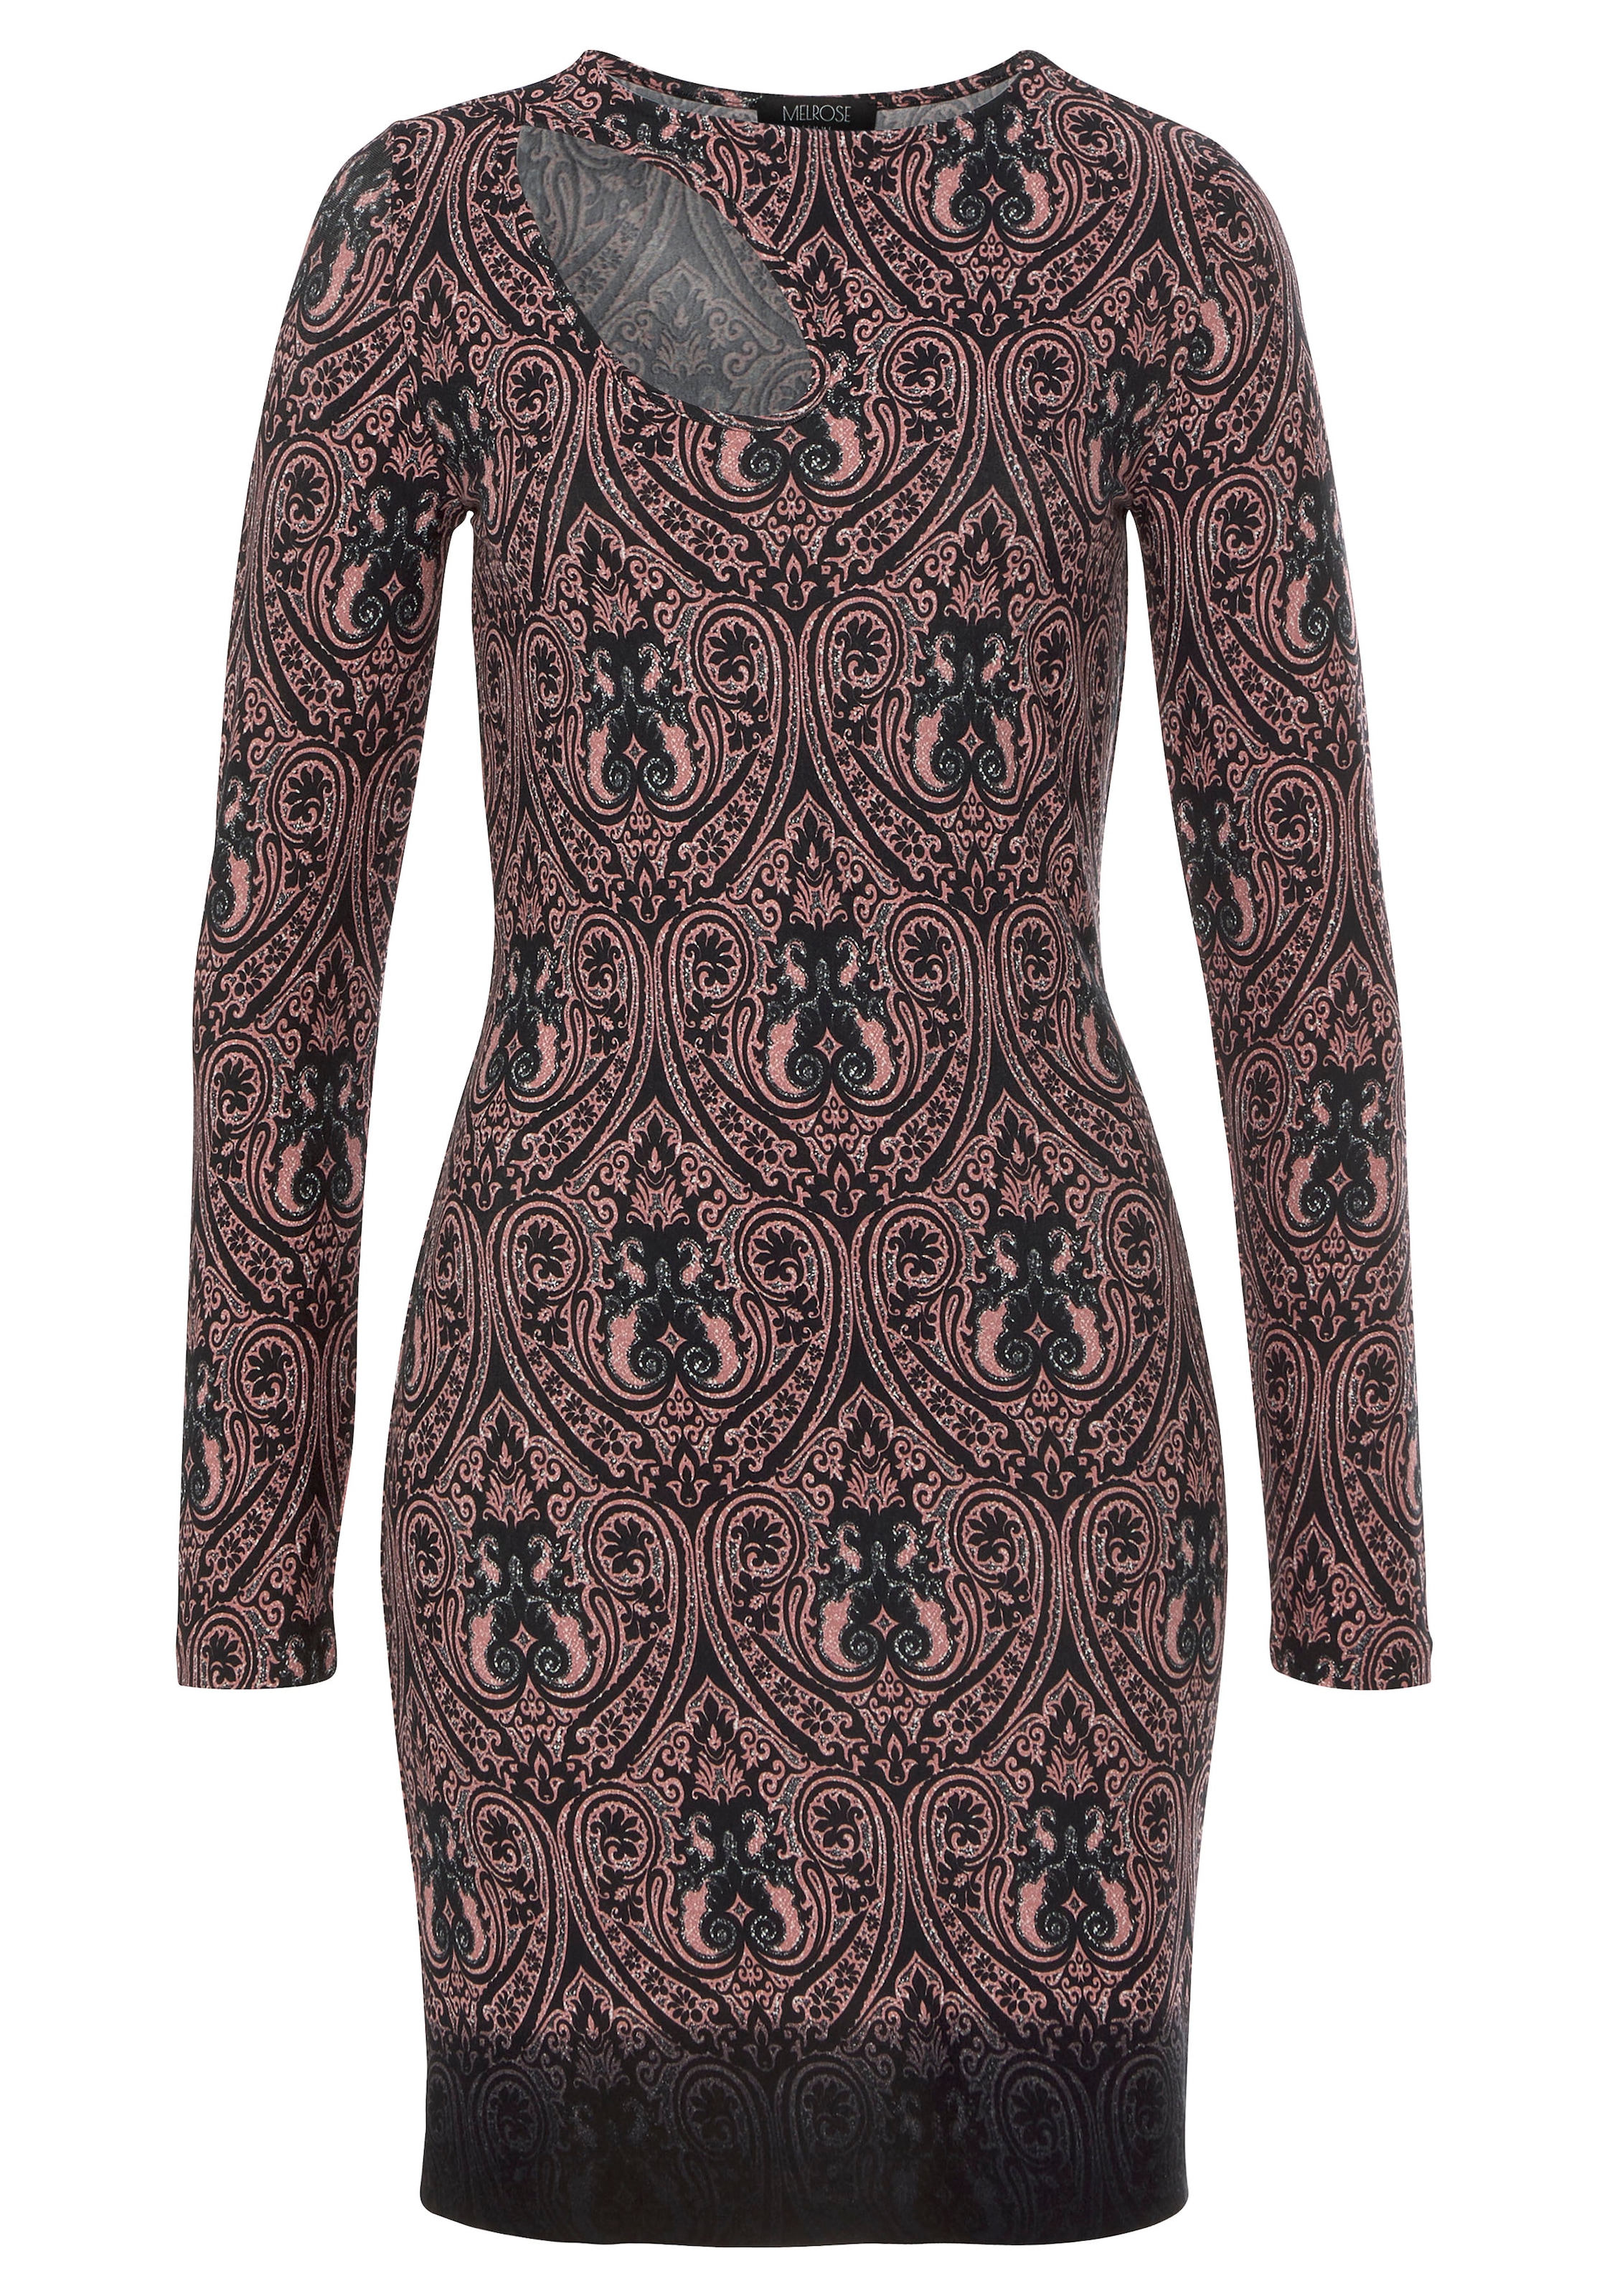 Paisley-Muster Melrose ♕ bei Jerseykleid, mit und Cut-Out